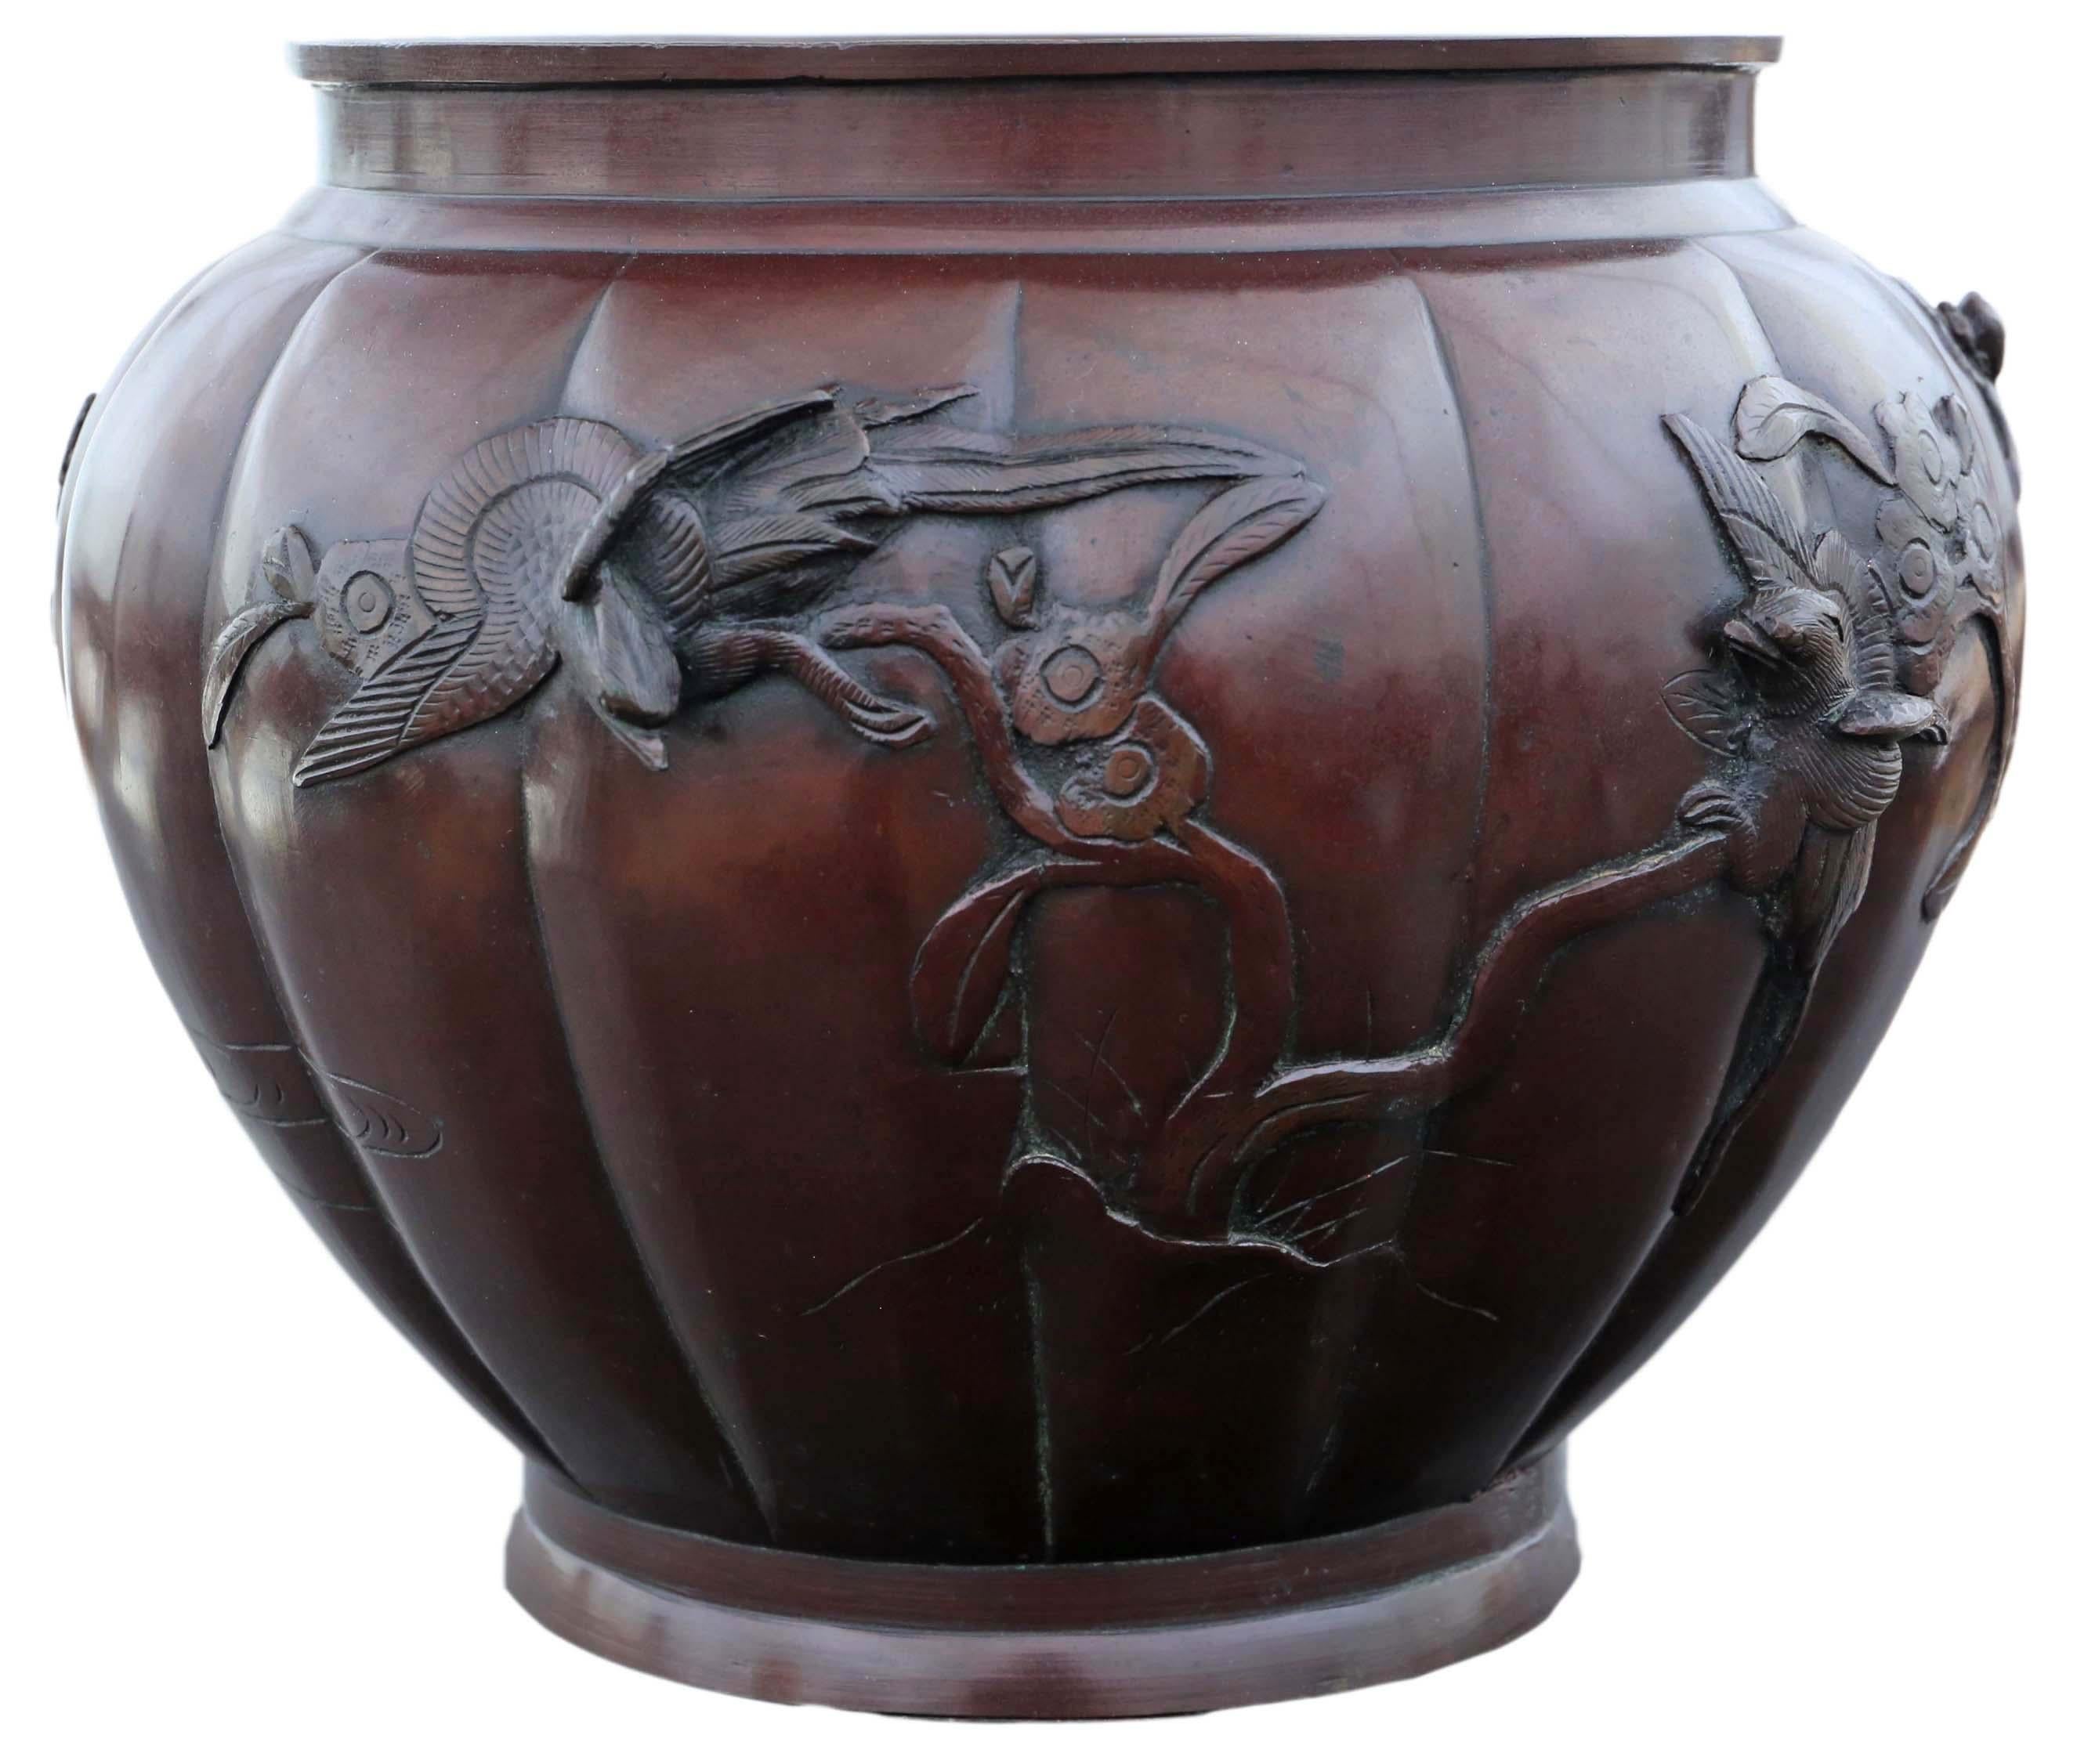 Fine Quality Large Japanese Bronze Jardinière Planter Pot - Meiji Period, 19th C In Good Condition For Sale In Wisbech, Cambridgeshire